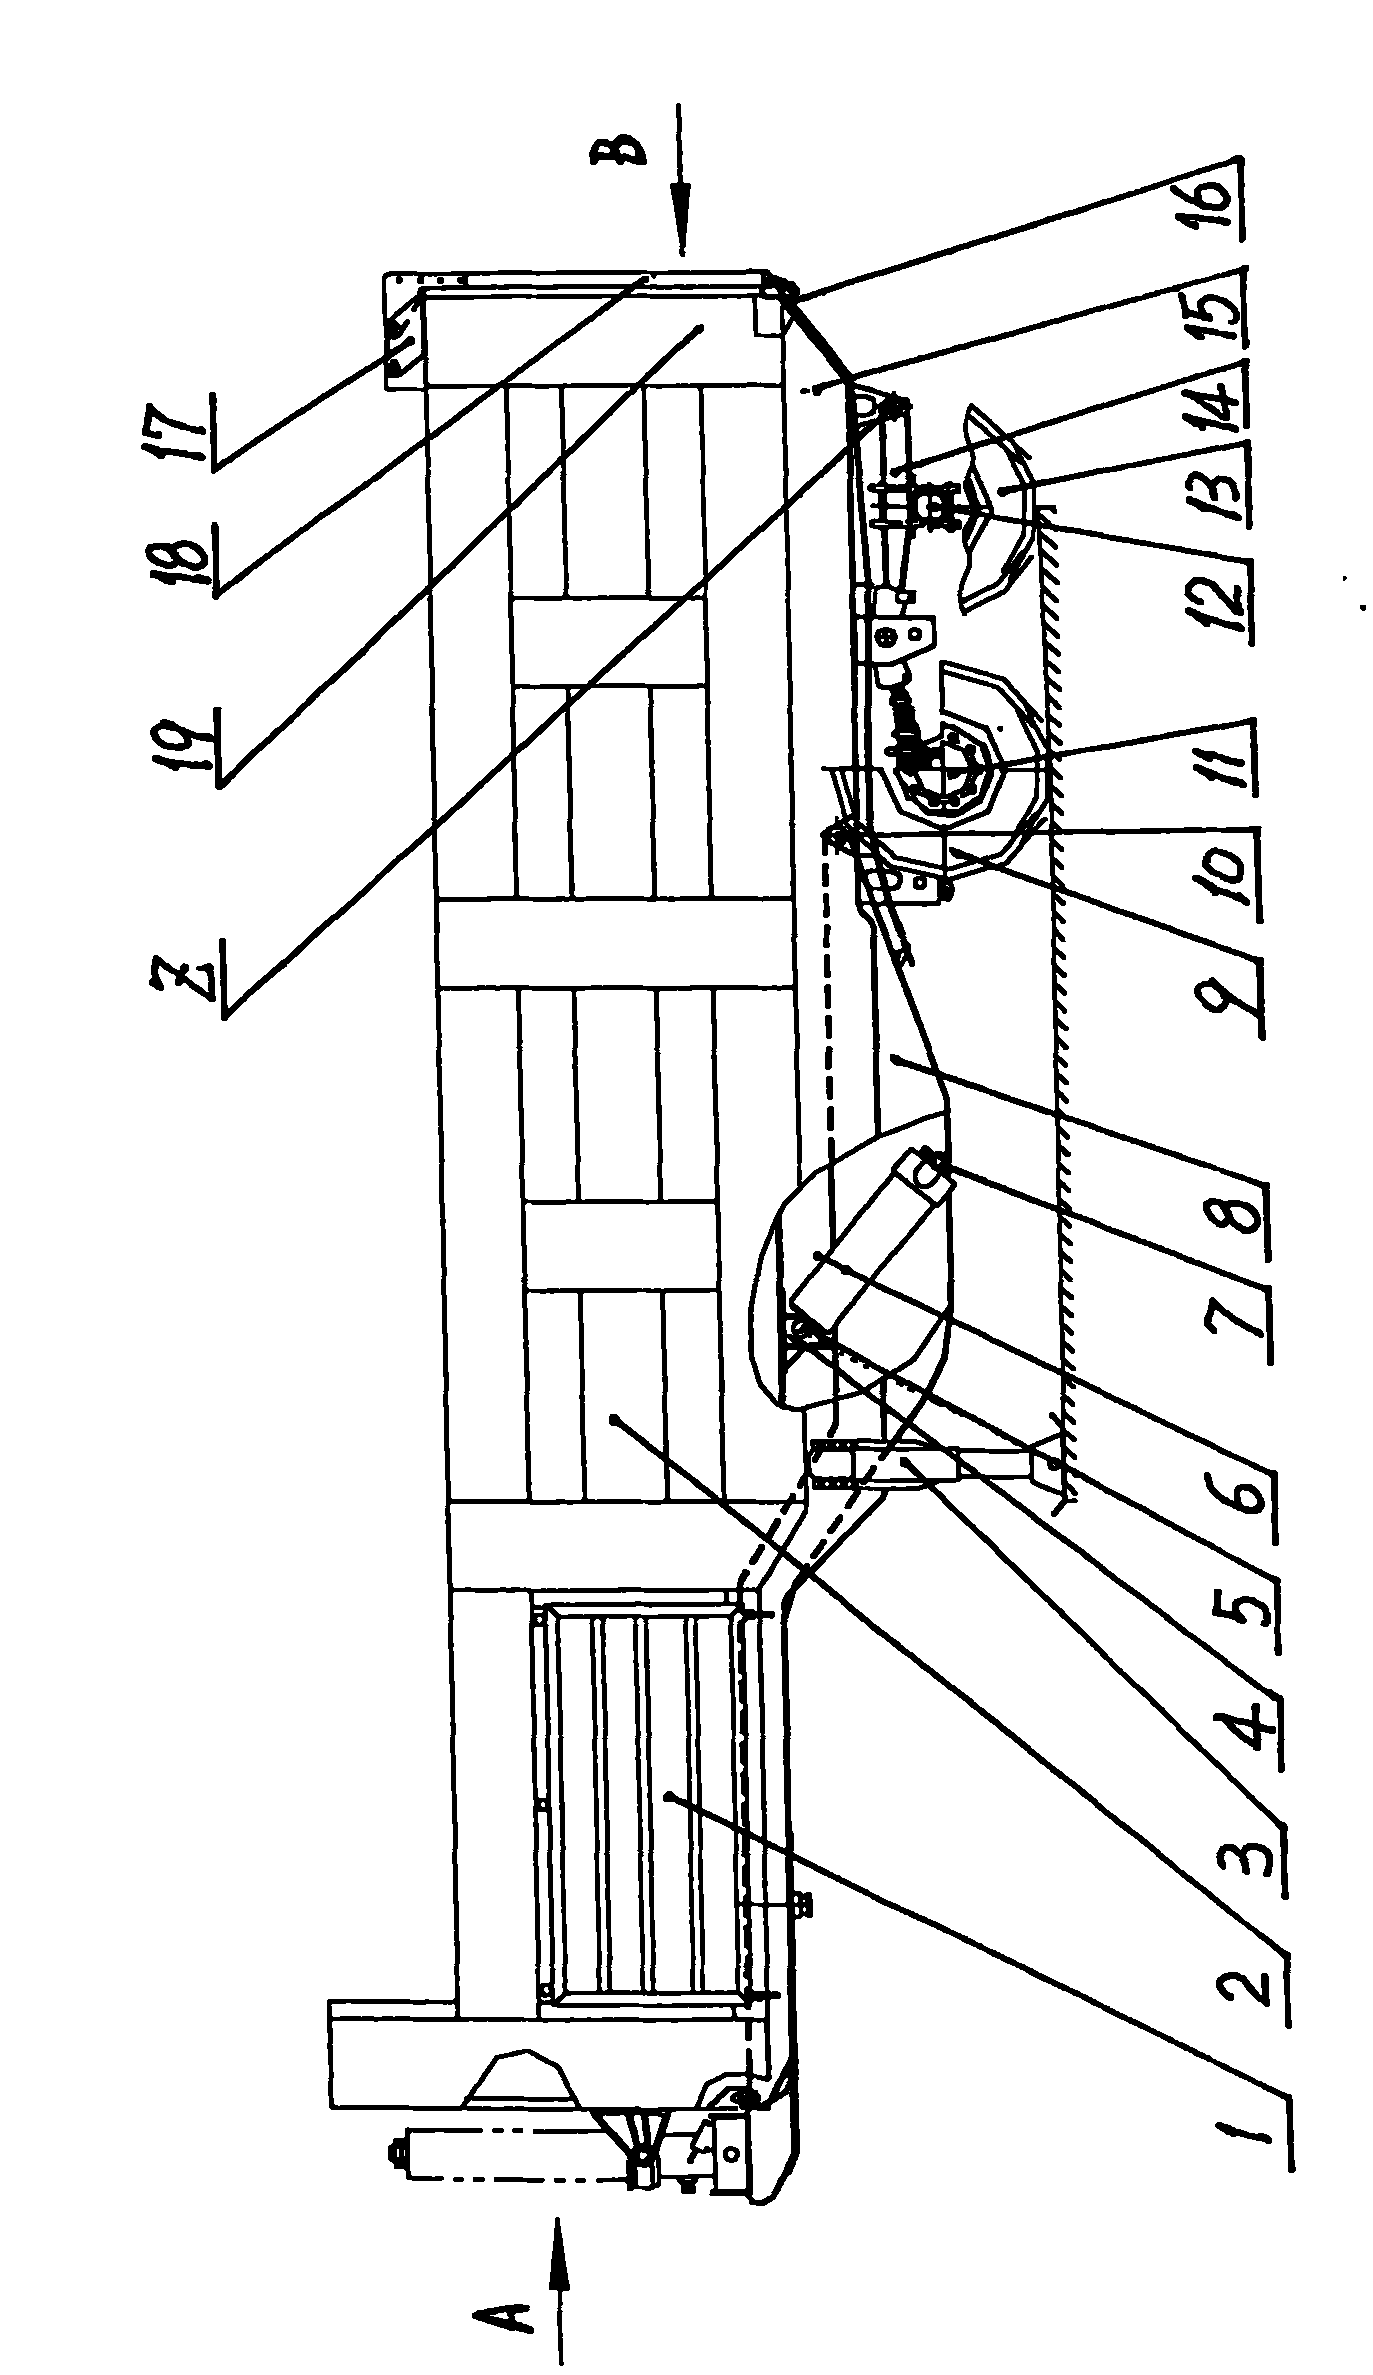 Turnover-type self-discharging semitrailer with low gravity centre supported by rear hub